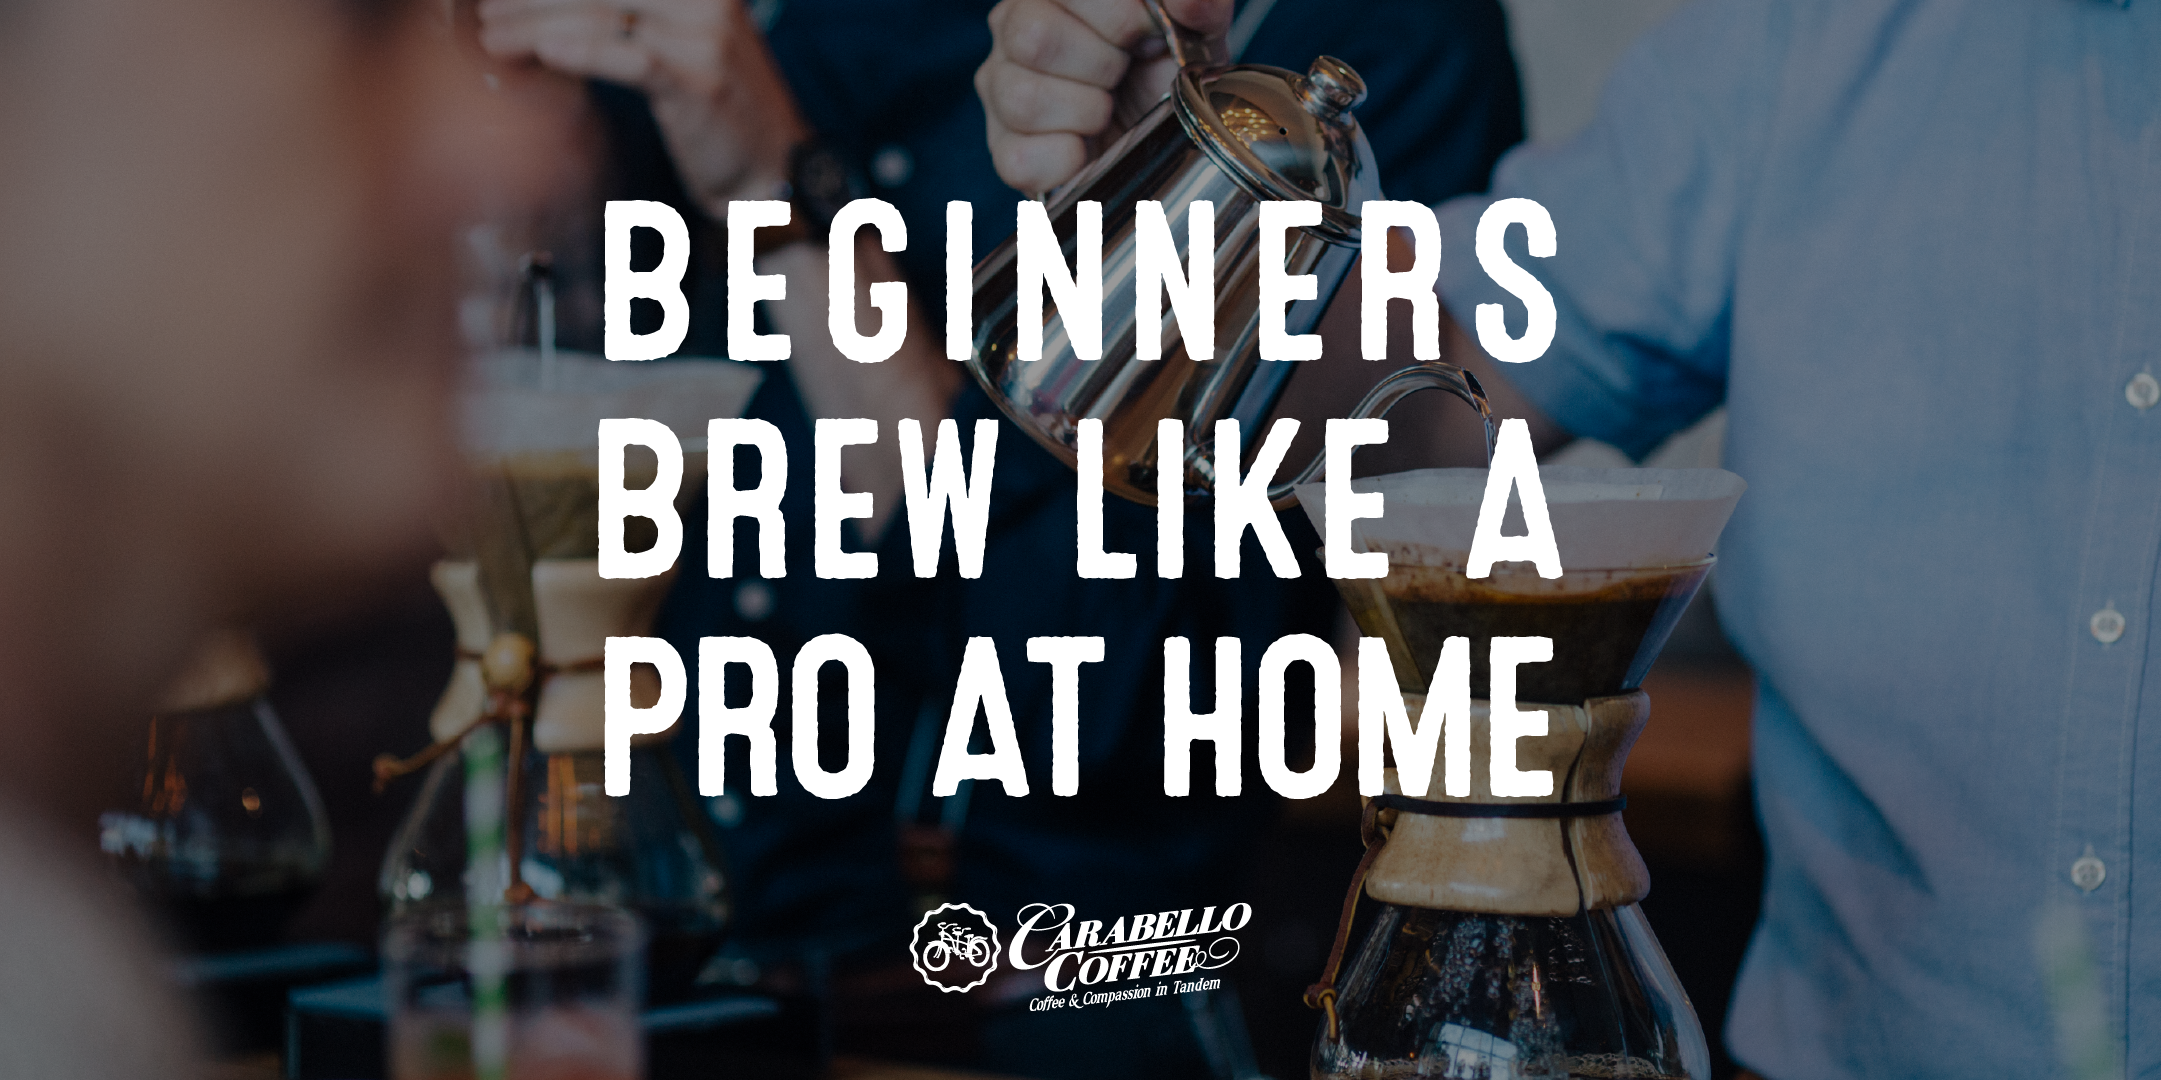 February 22nd Brew Like a Pro at Home Beginner Class